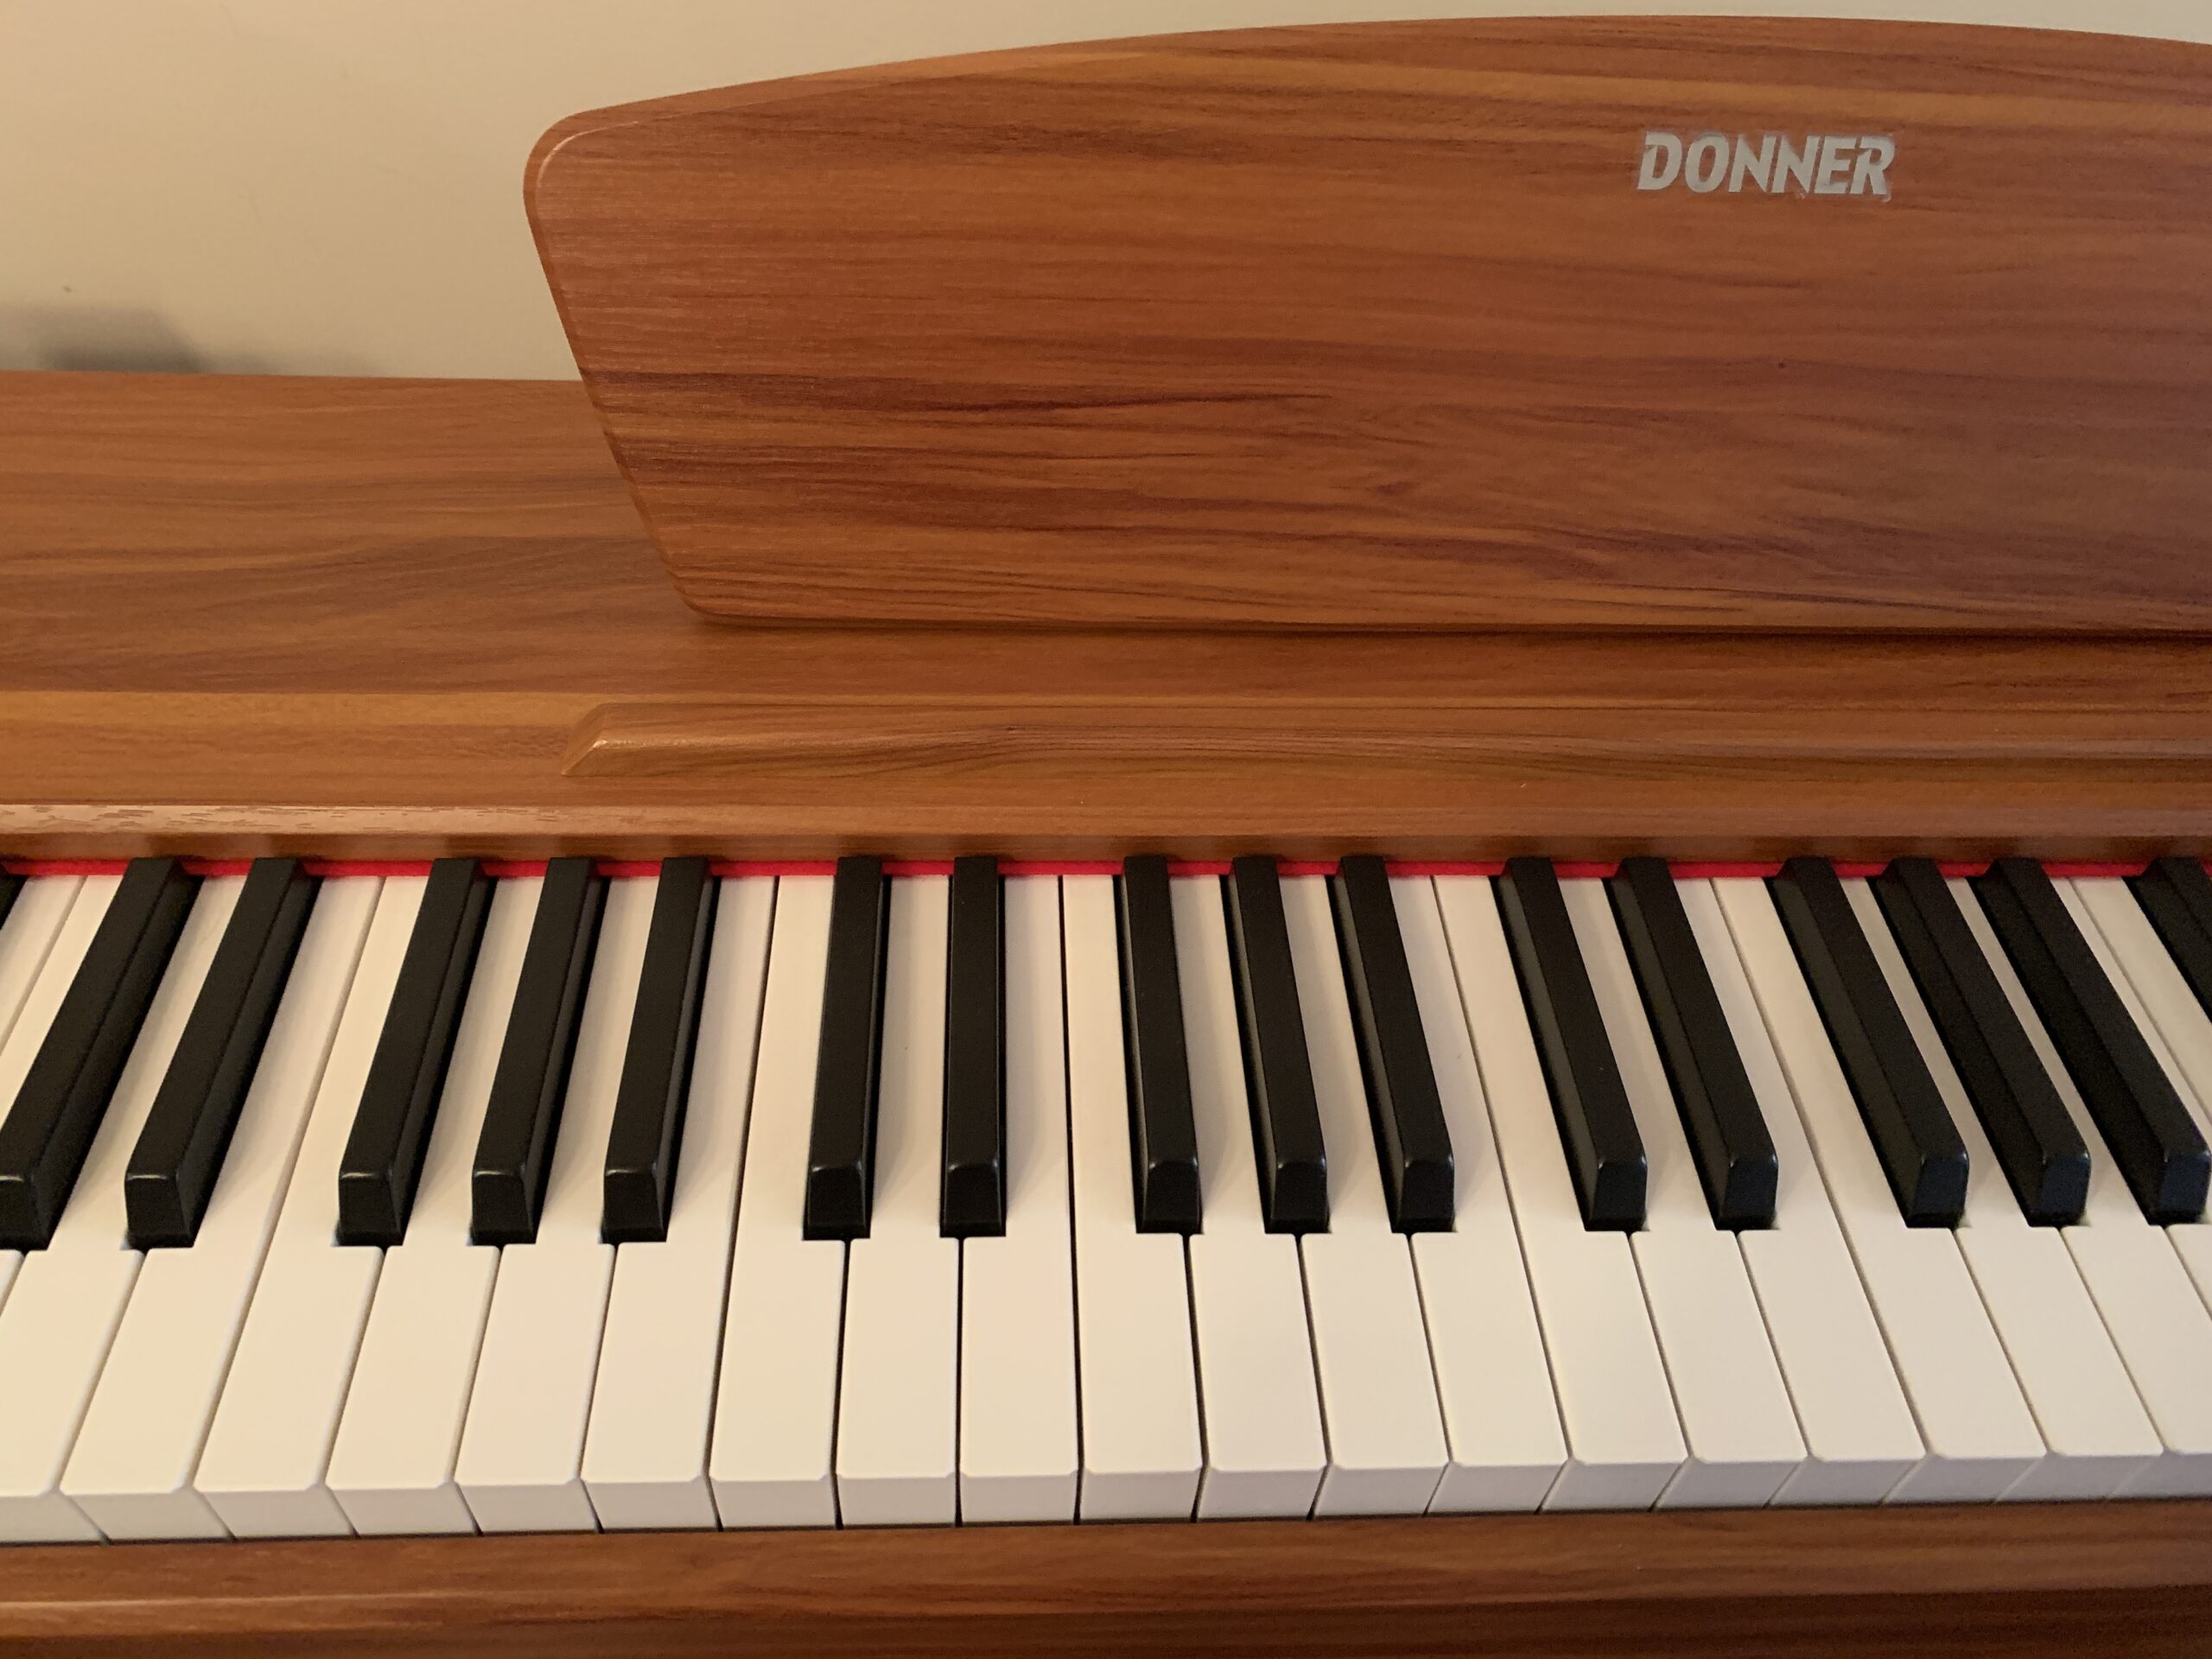 Donner DDP-80  Digital piano, Keyboards, Your music